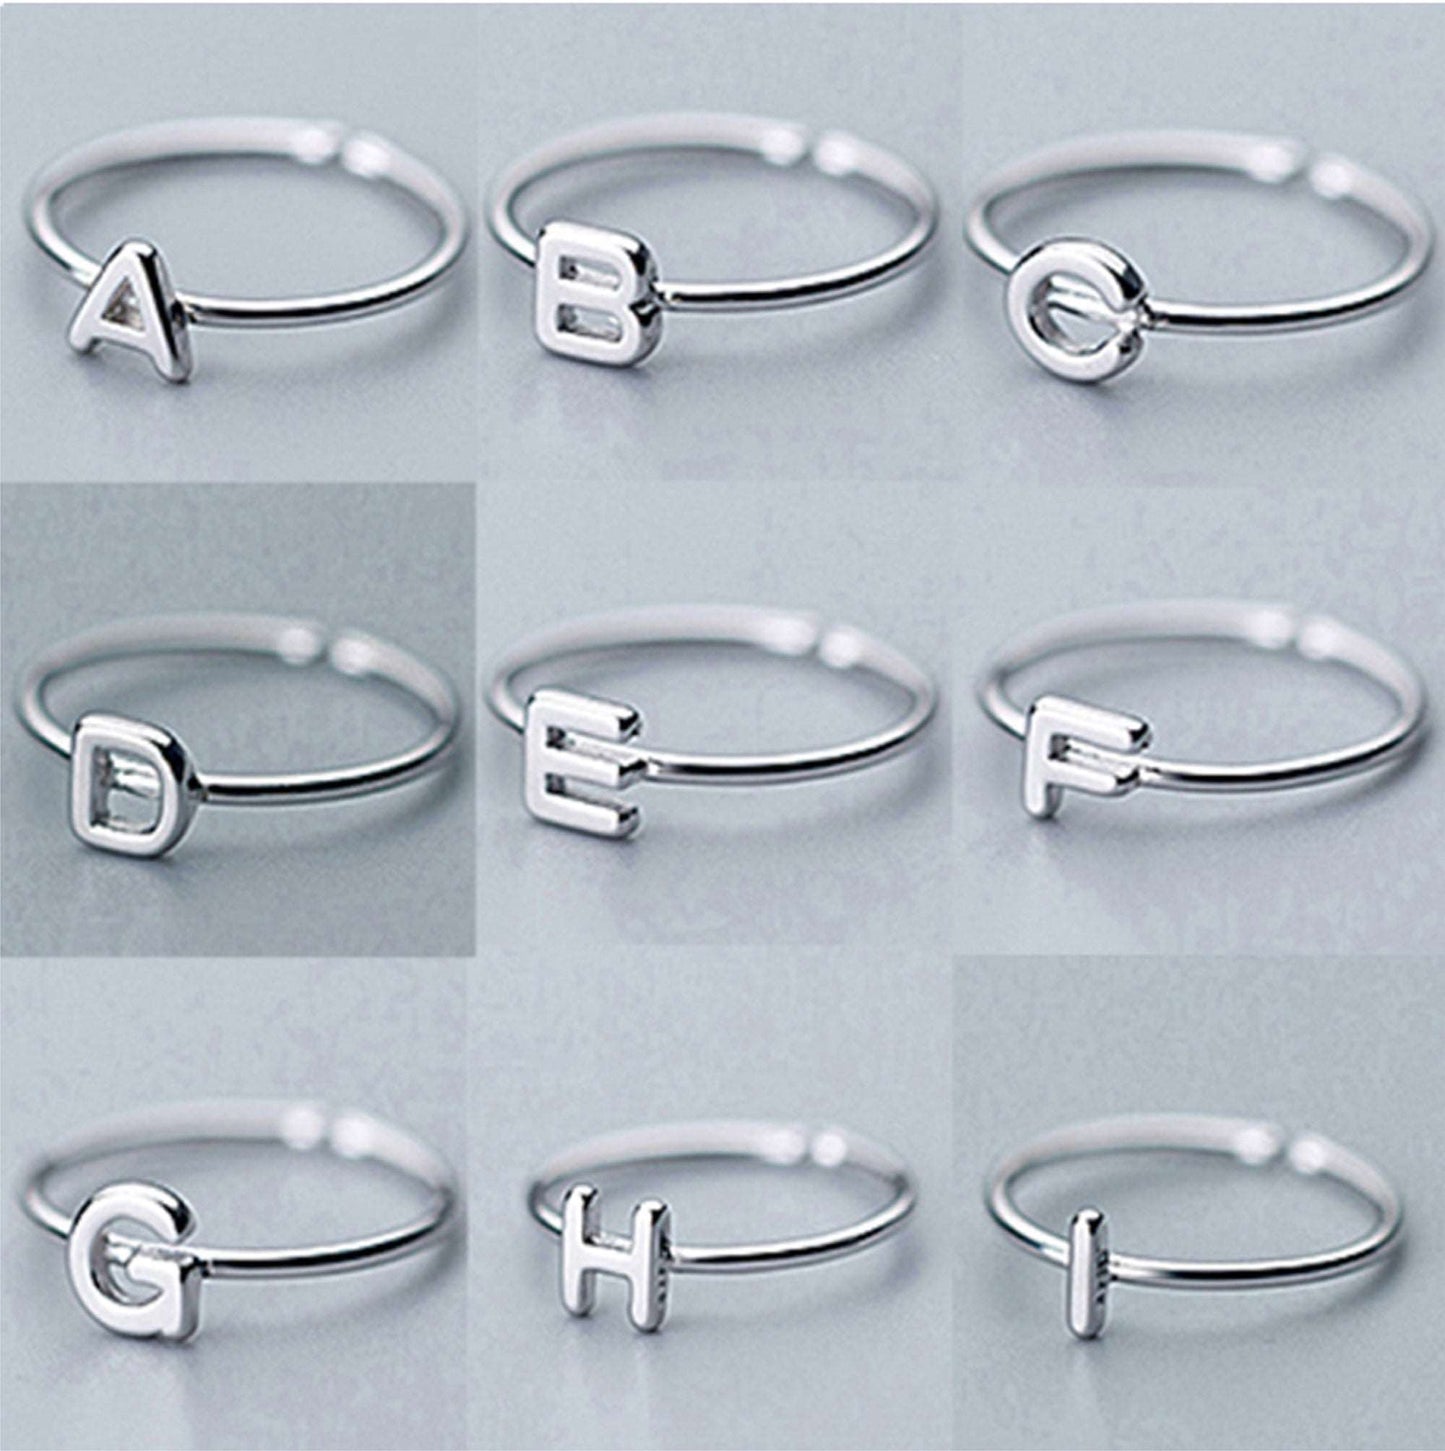 Sterling Silver adjustable initial rings Handcrafted for you guaranteed fit - Providence silver gold jewelry usa